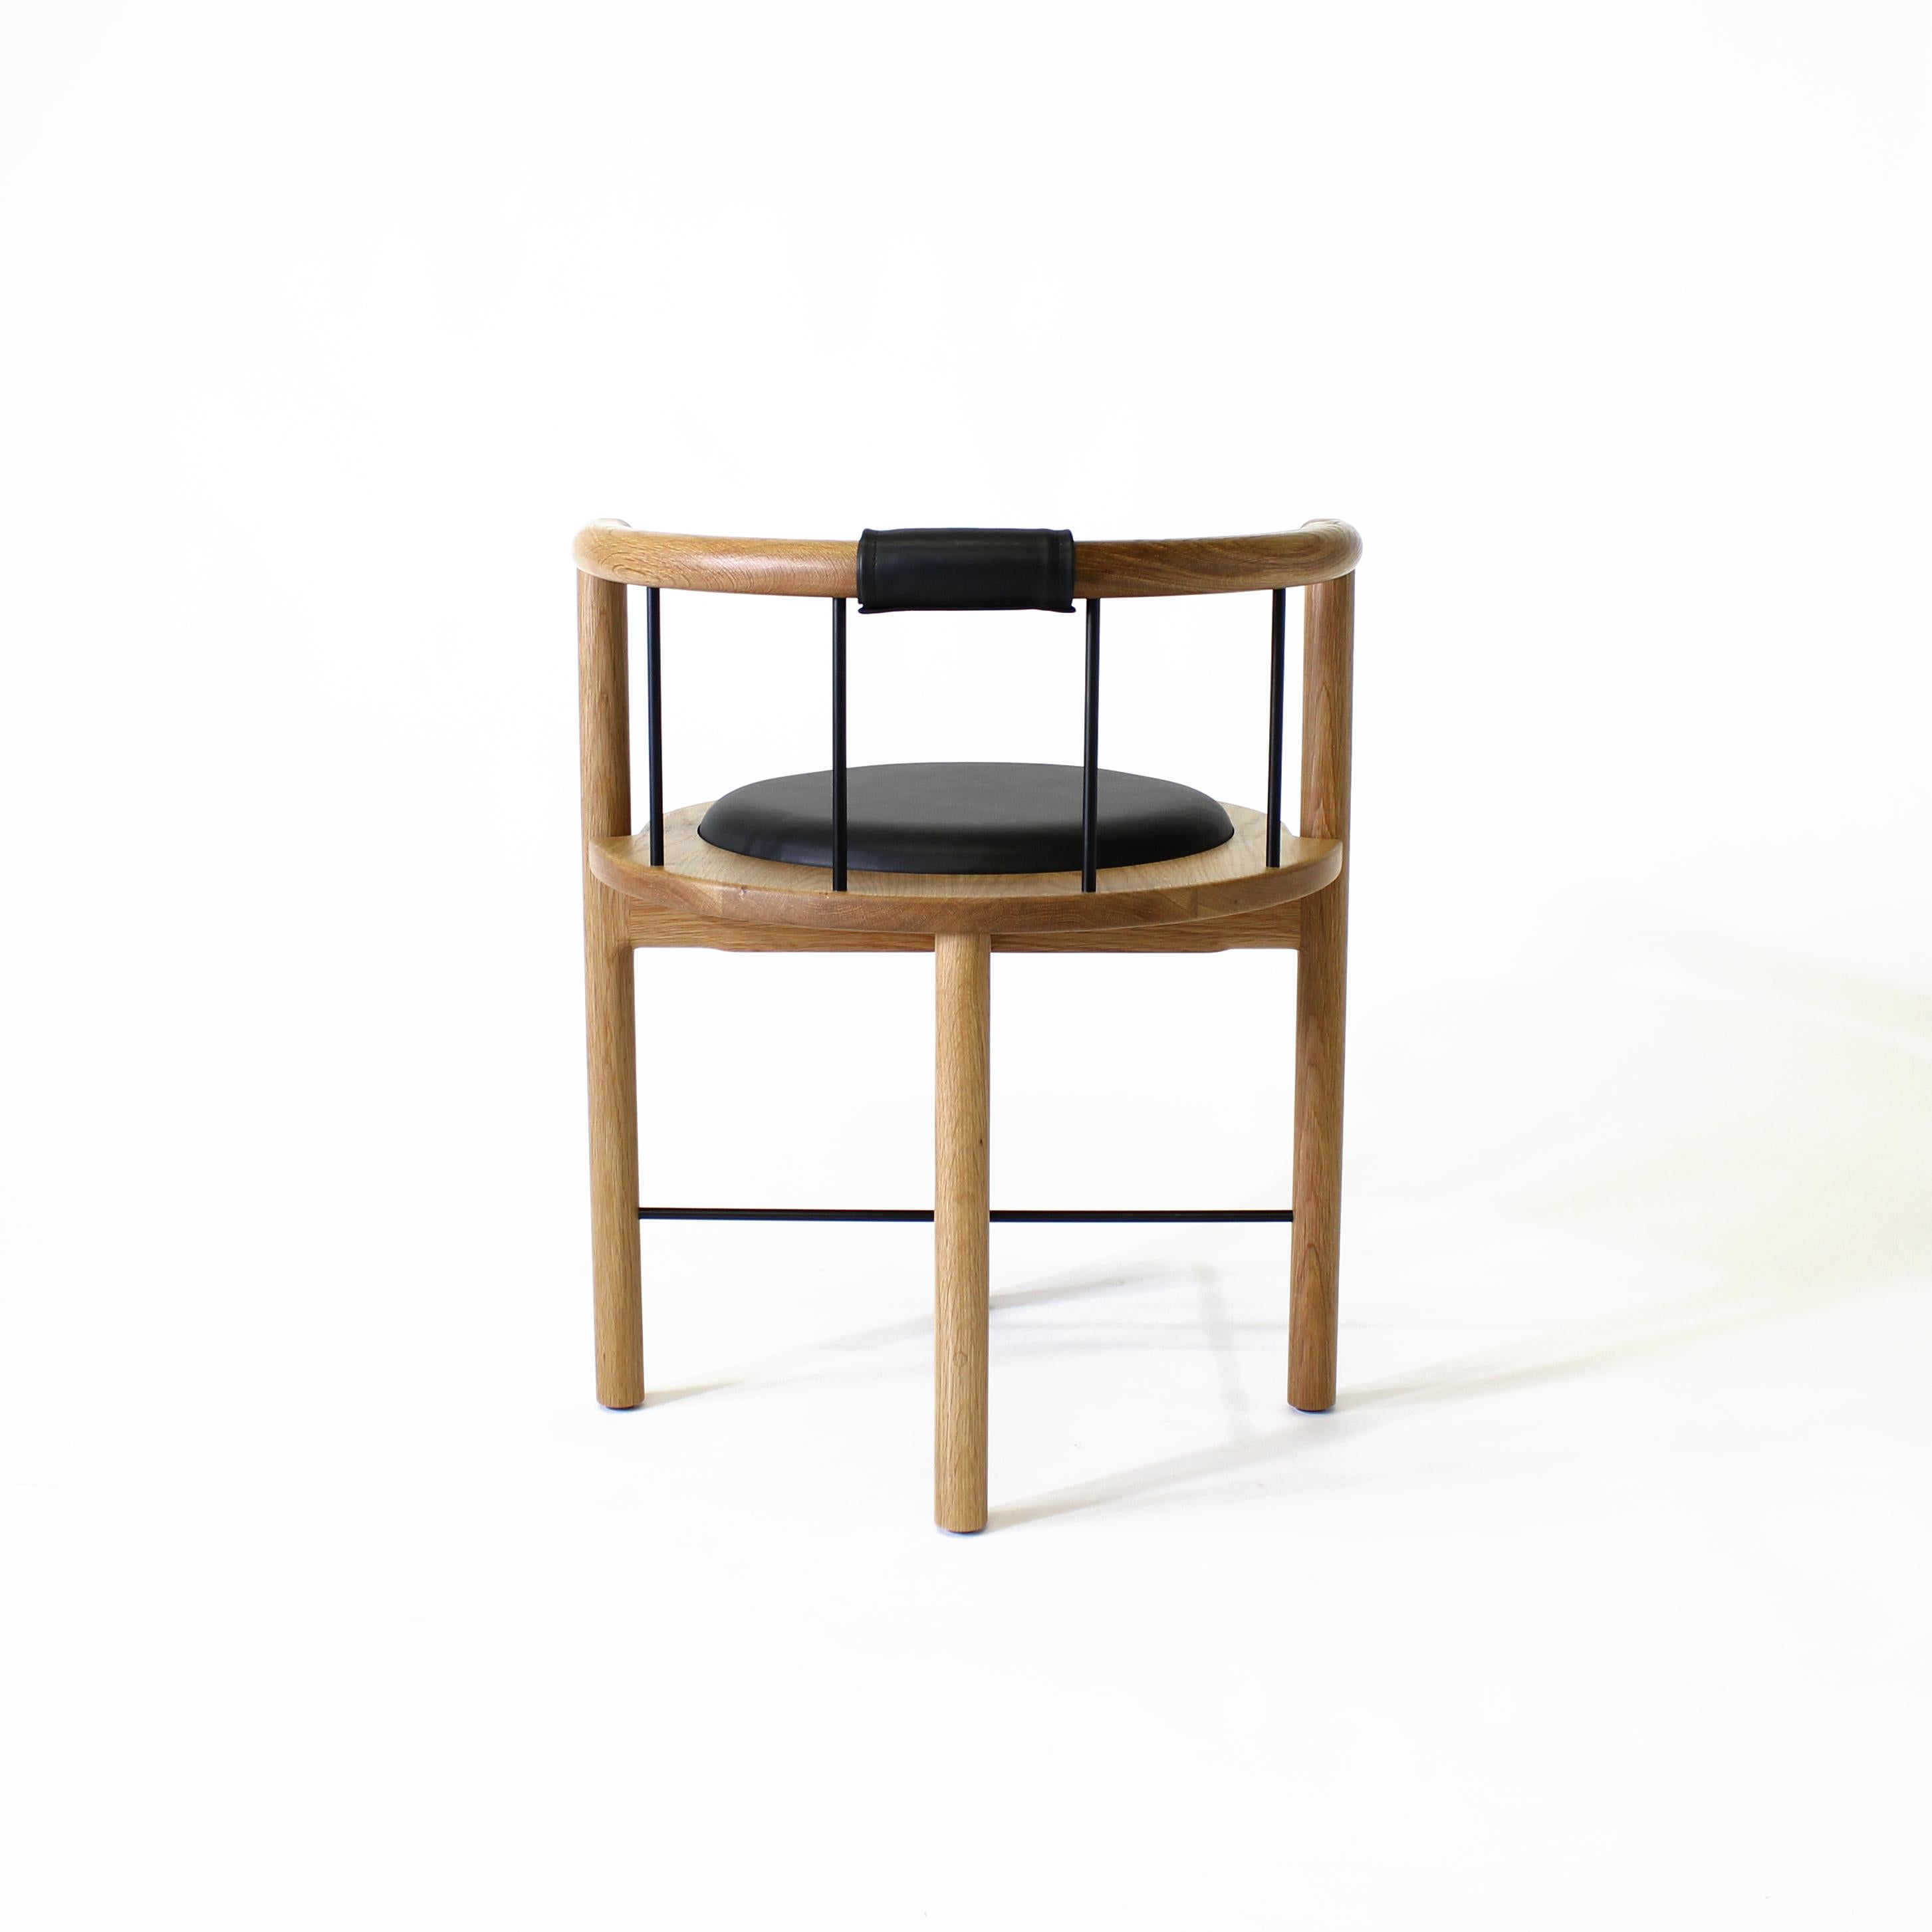 Lloyd Accent chair by Crump and Kwash

Solid wood frame / hand rubbed oil finish / brushed brass or bronze rungs / leather wrapped back support / recessed leather seat cushion

Dimensions:
23”w x 21”d x 27” h (18” seat height)

Upholstery